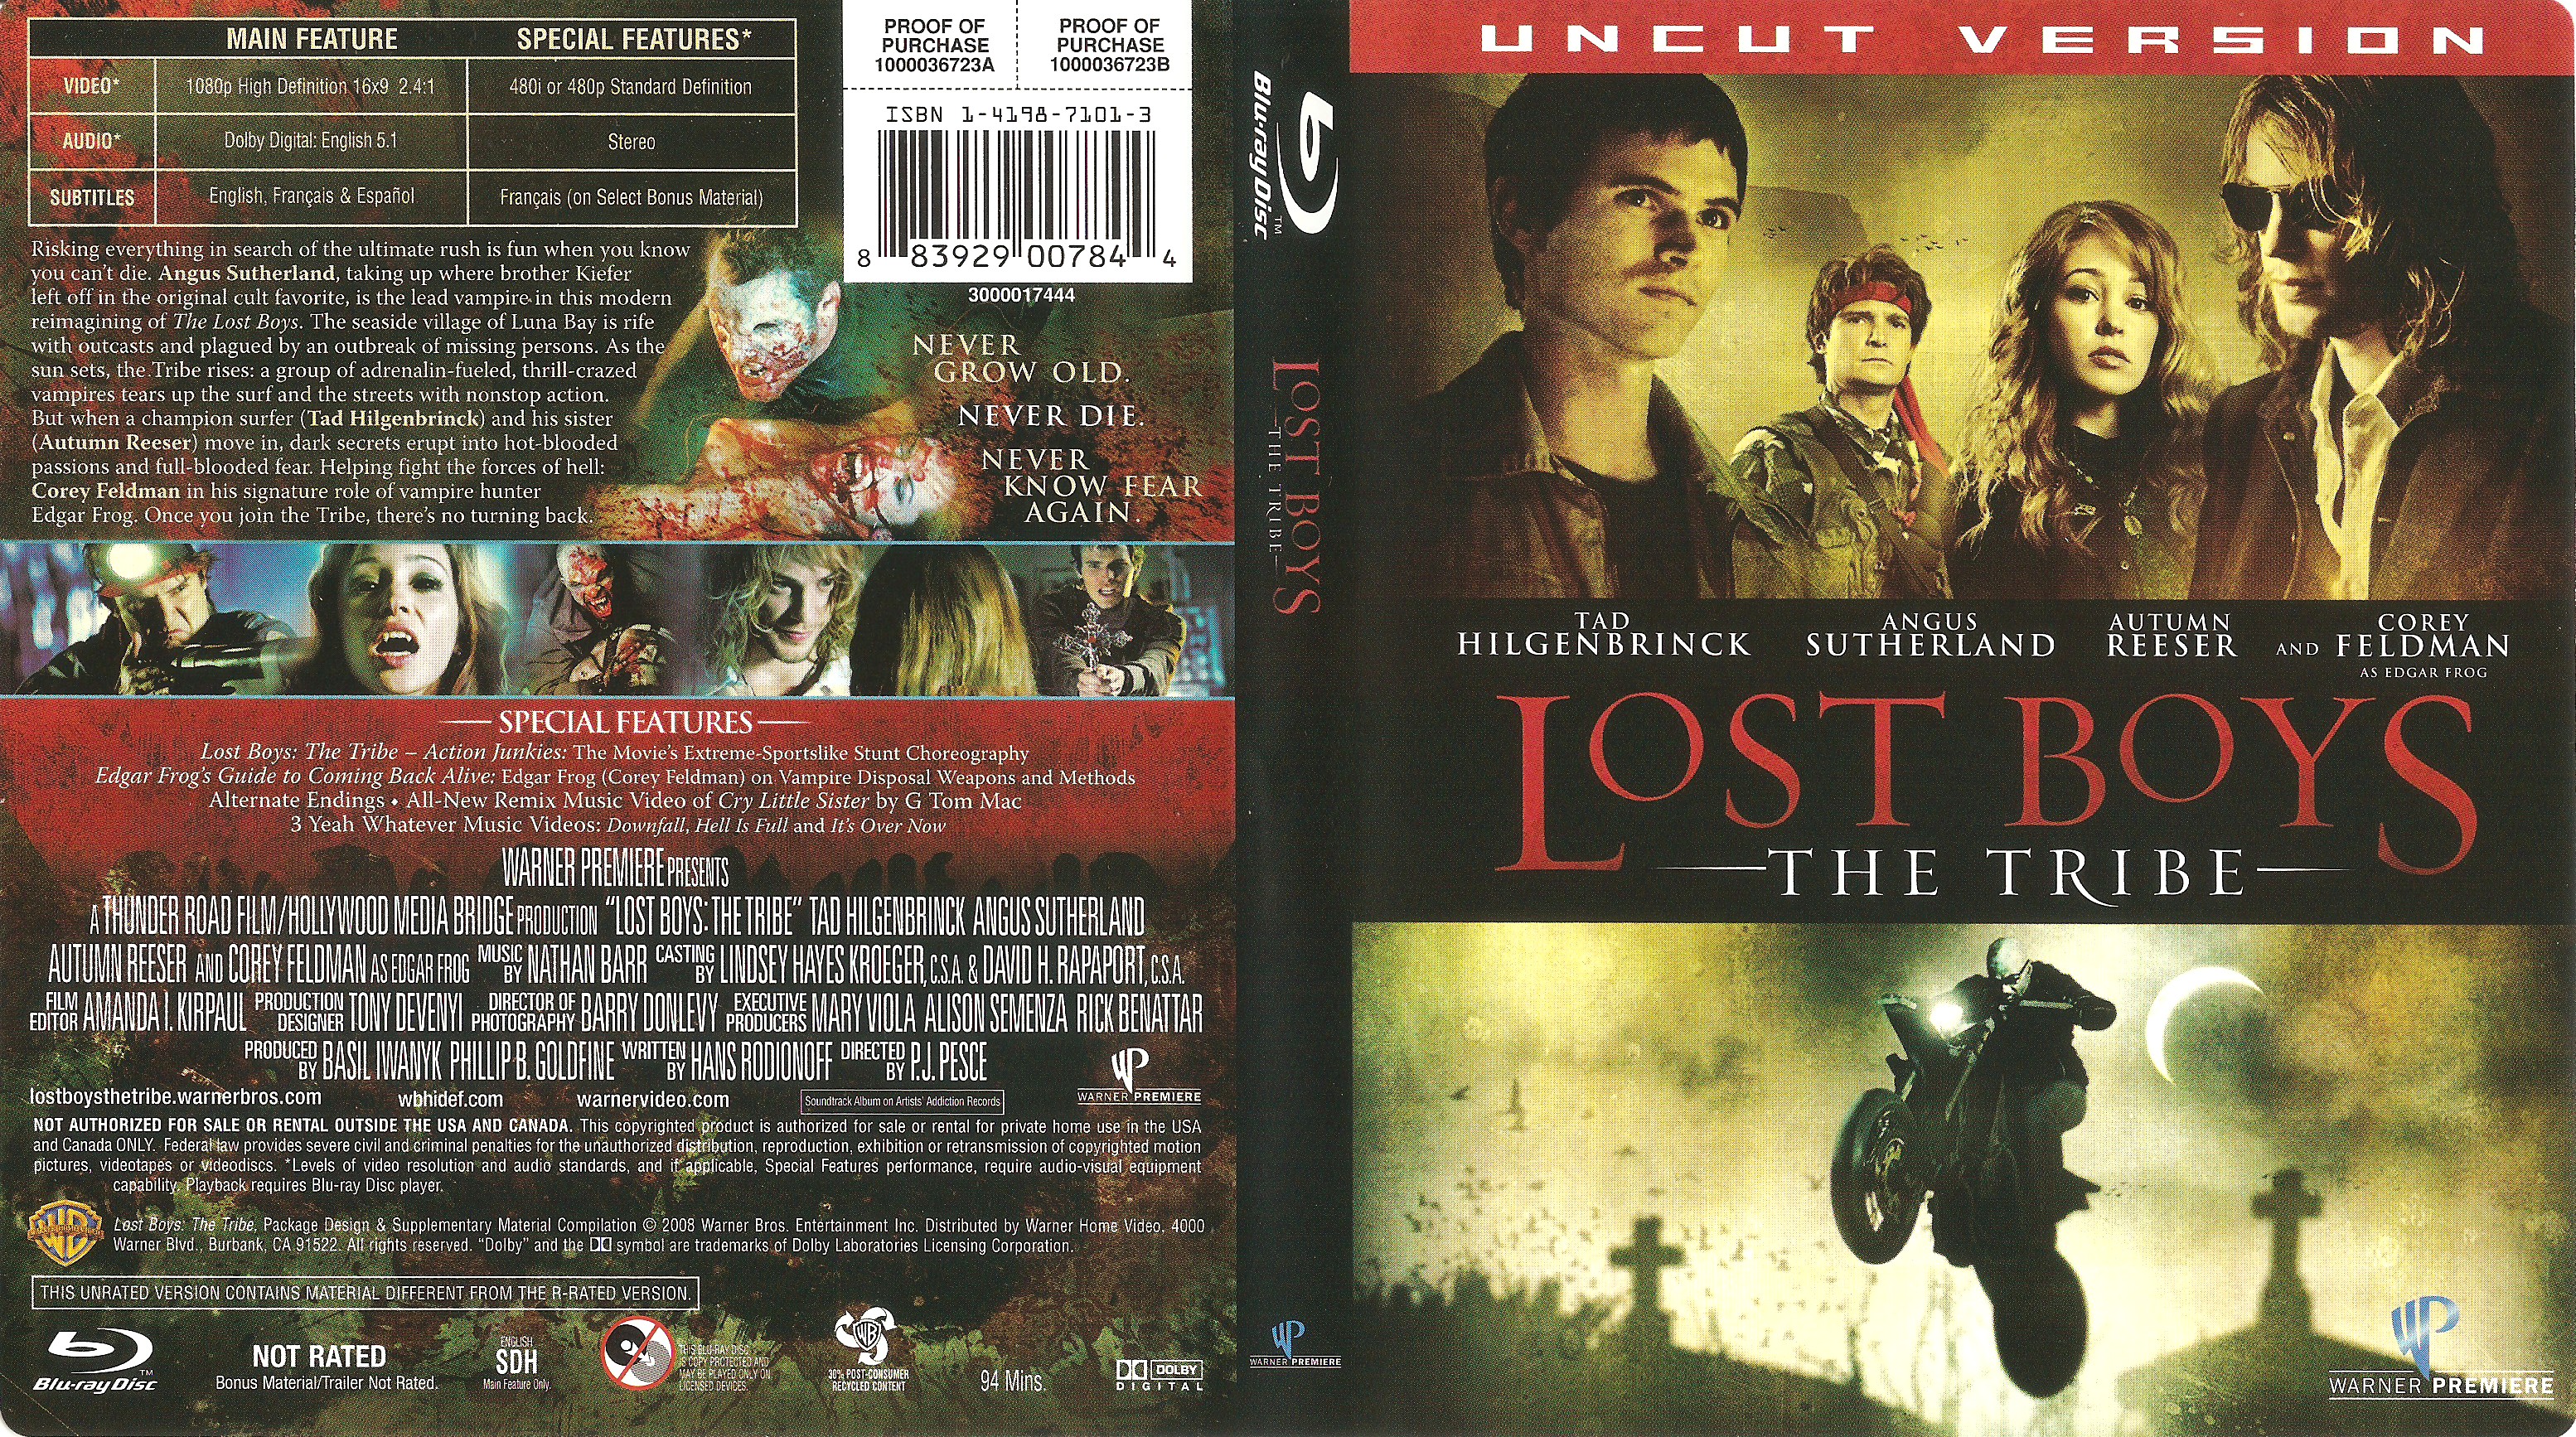 Jaquette DVD Gnration Perdue 2 (Lost Boys The Tribe) Zone 1 (BLU-RAY)